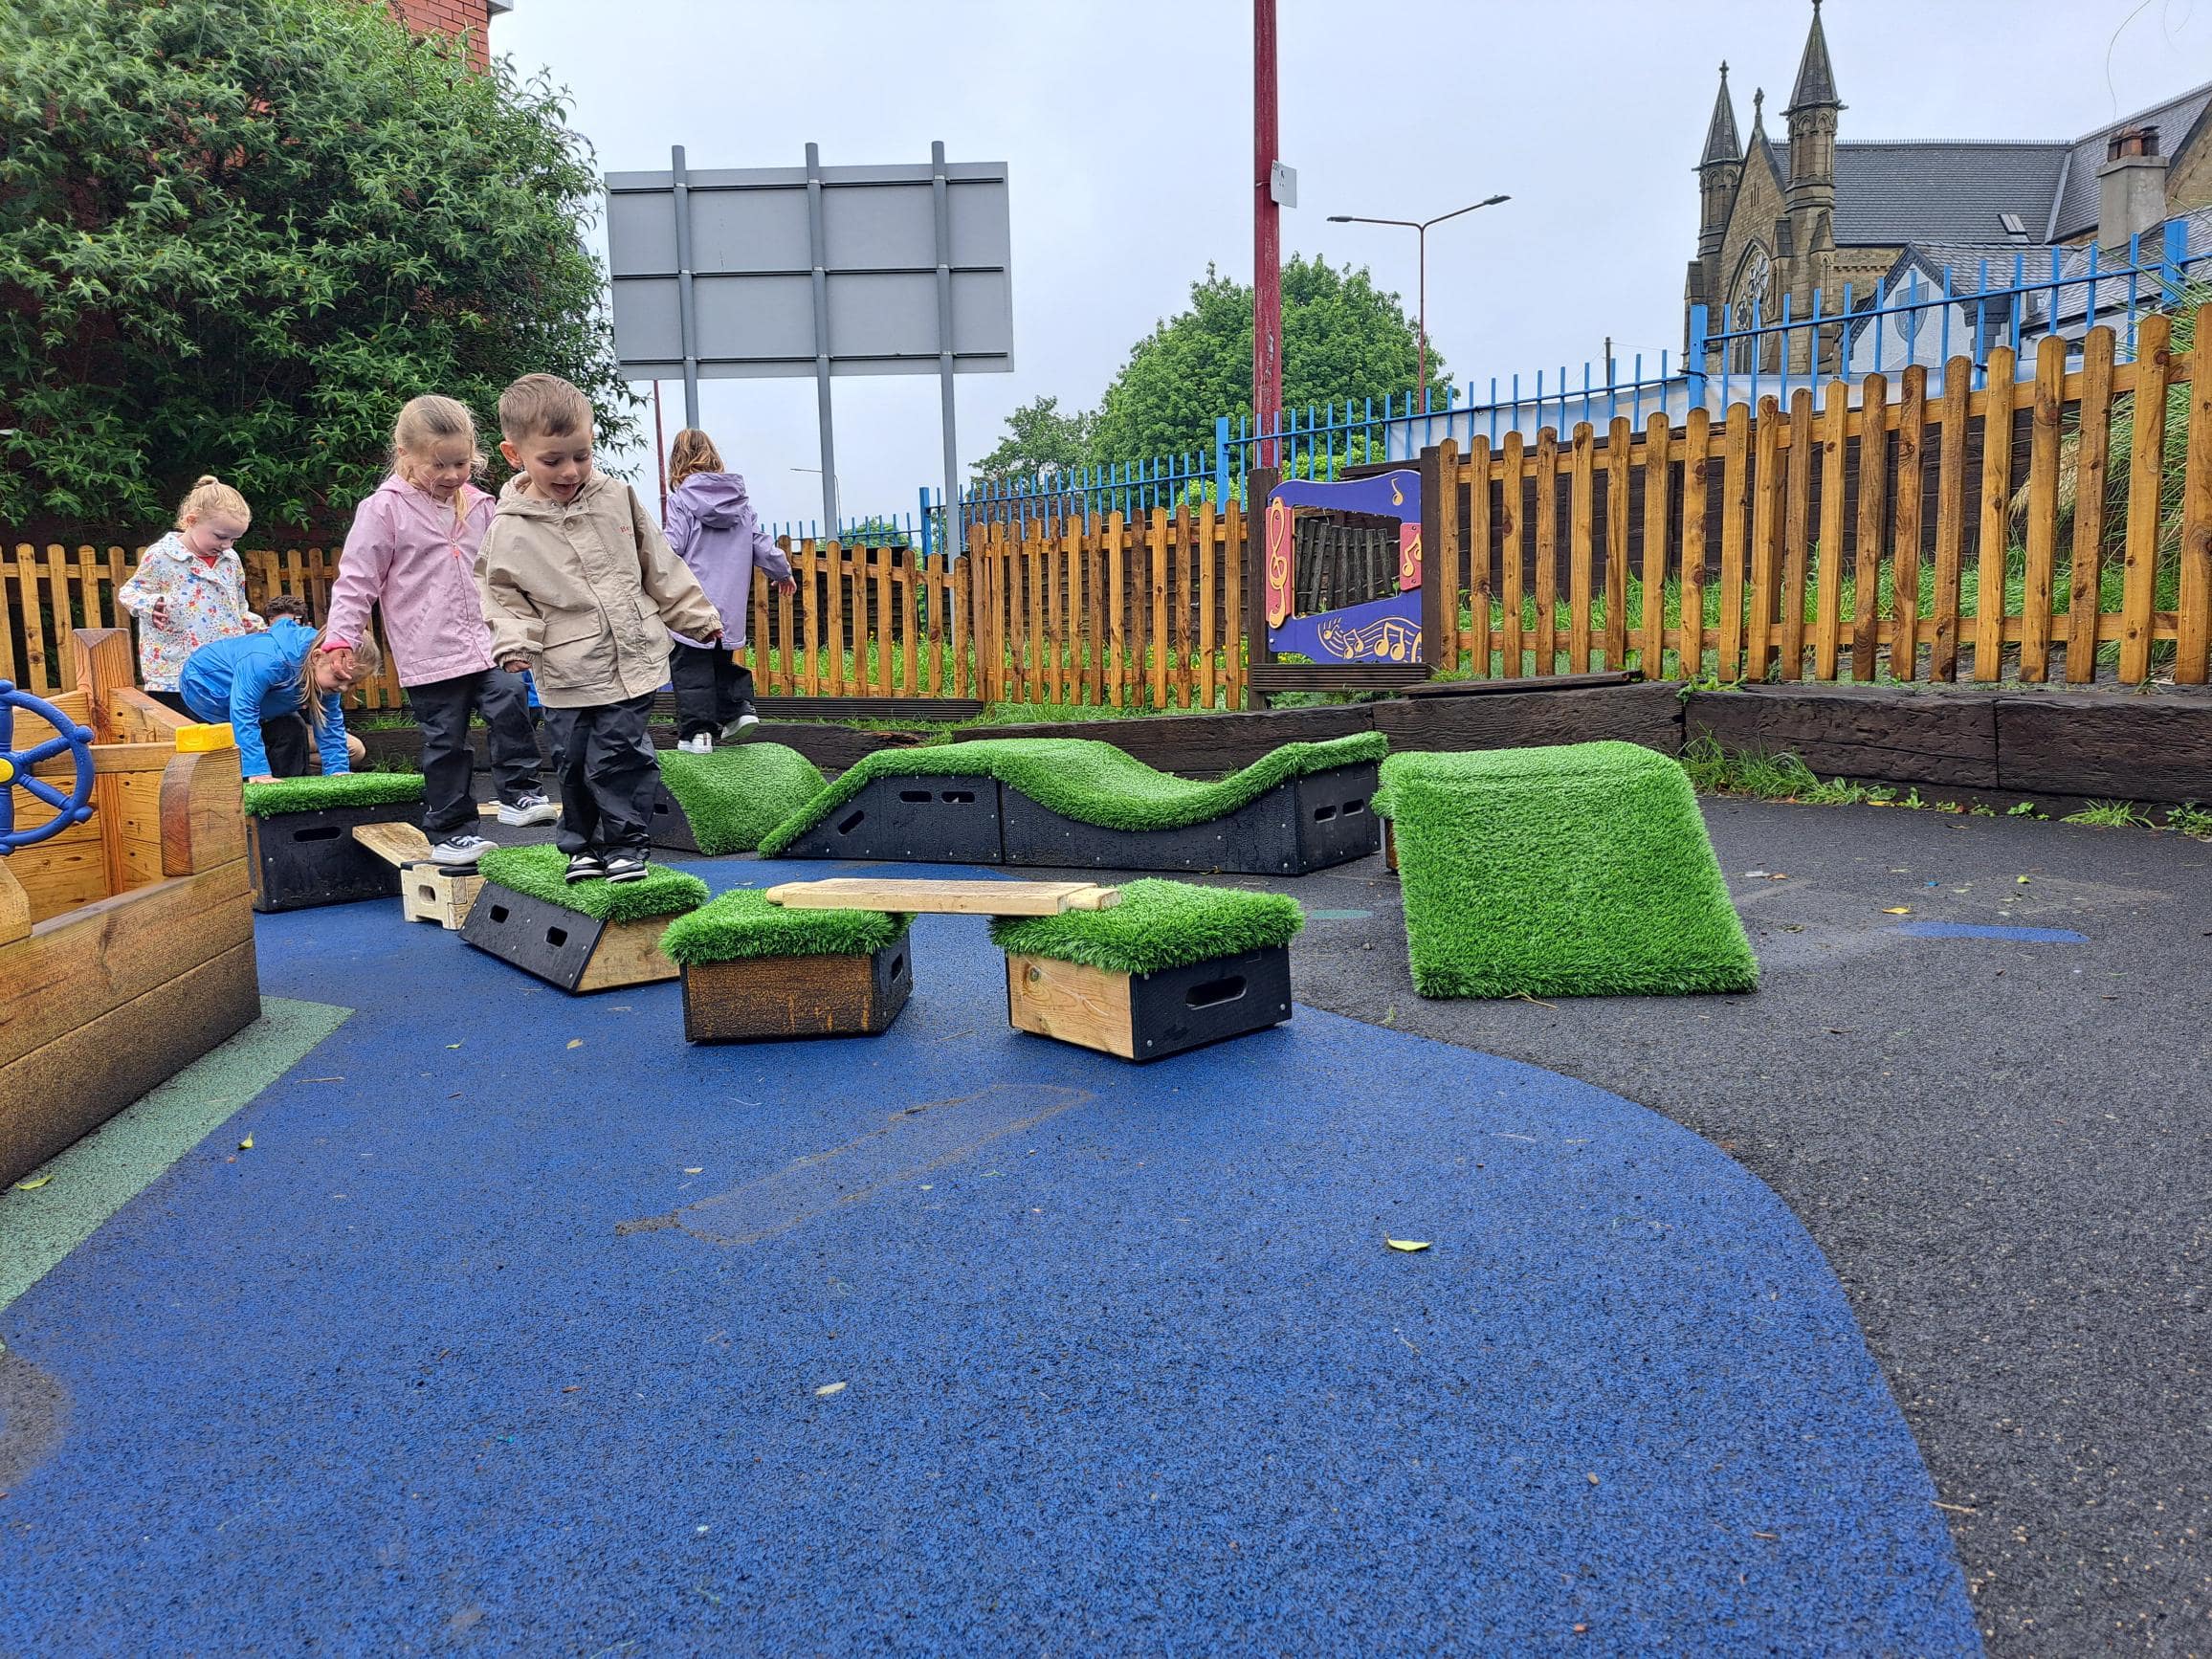 A group of children are picking up wooden planks and blocks as they move them around a playground to create an obstacle course. The children look excited and happy as they build.